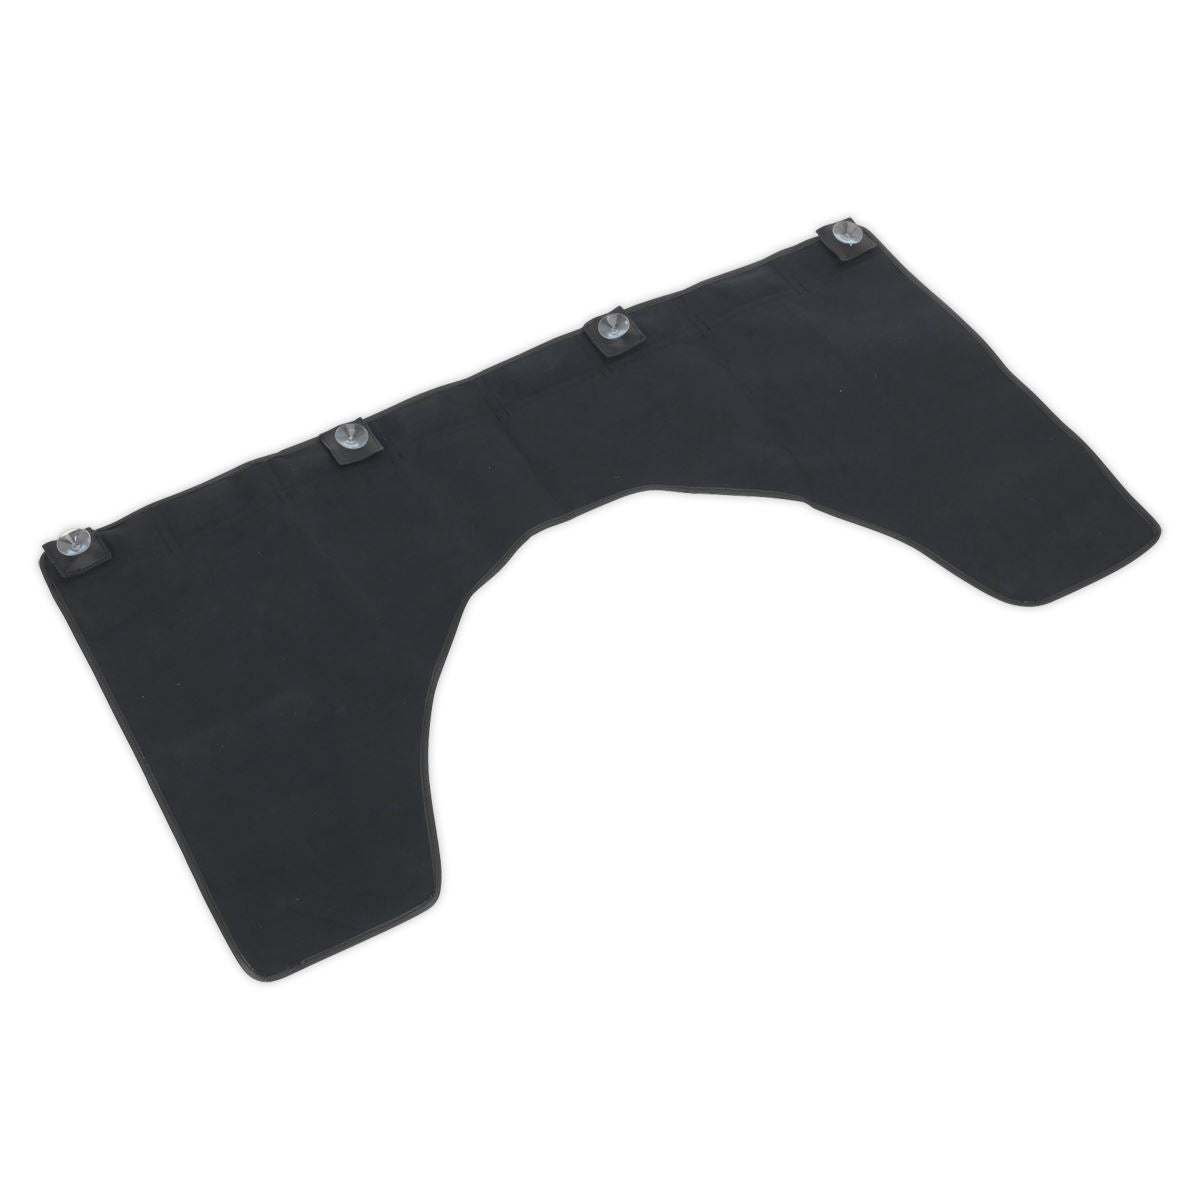 Sealey Magnetic & Suction Grip Workshop Wing Cover